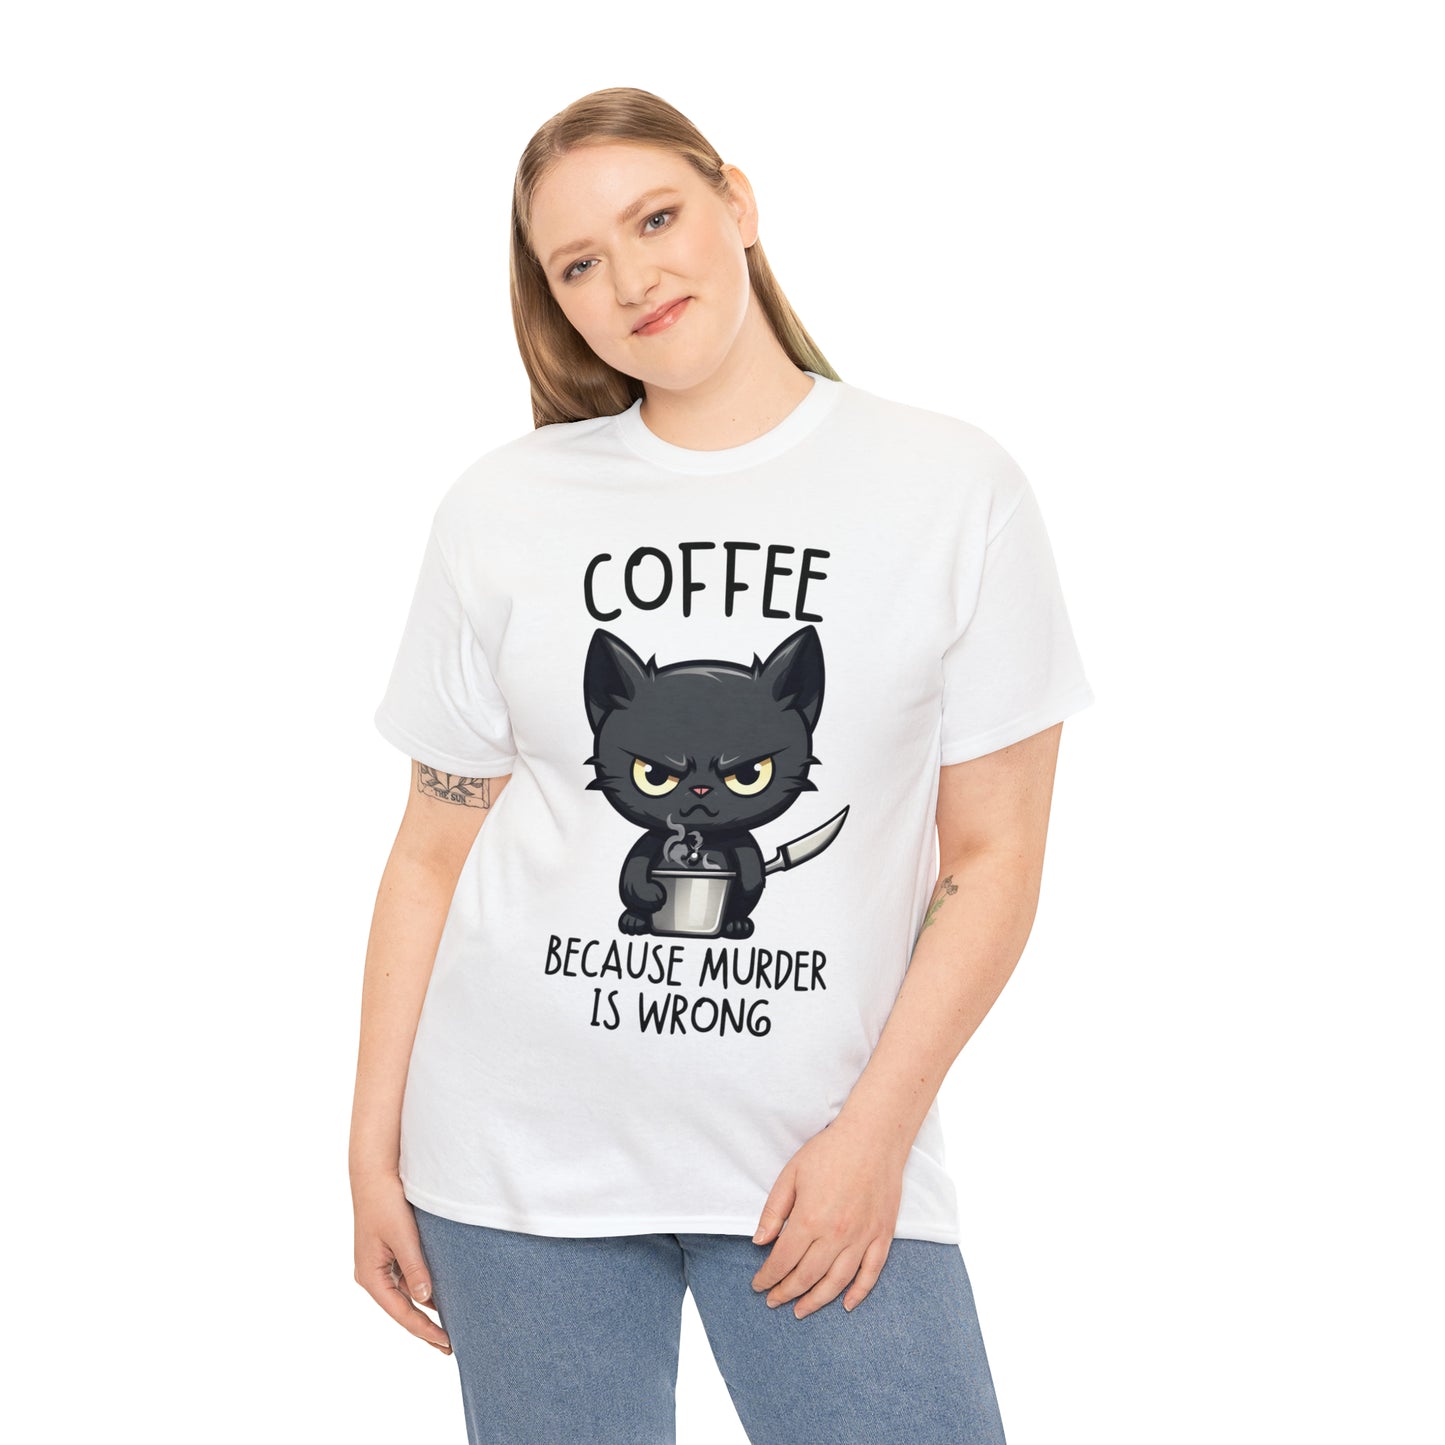 Be Nice To Your Cat! Have A Coffee